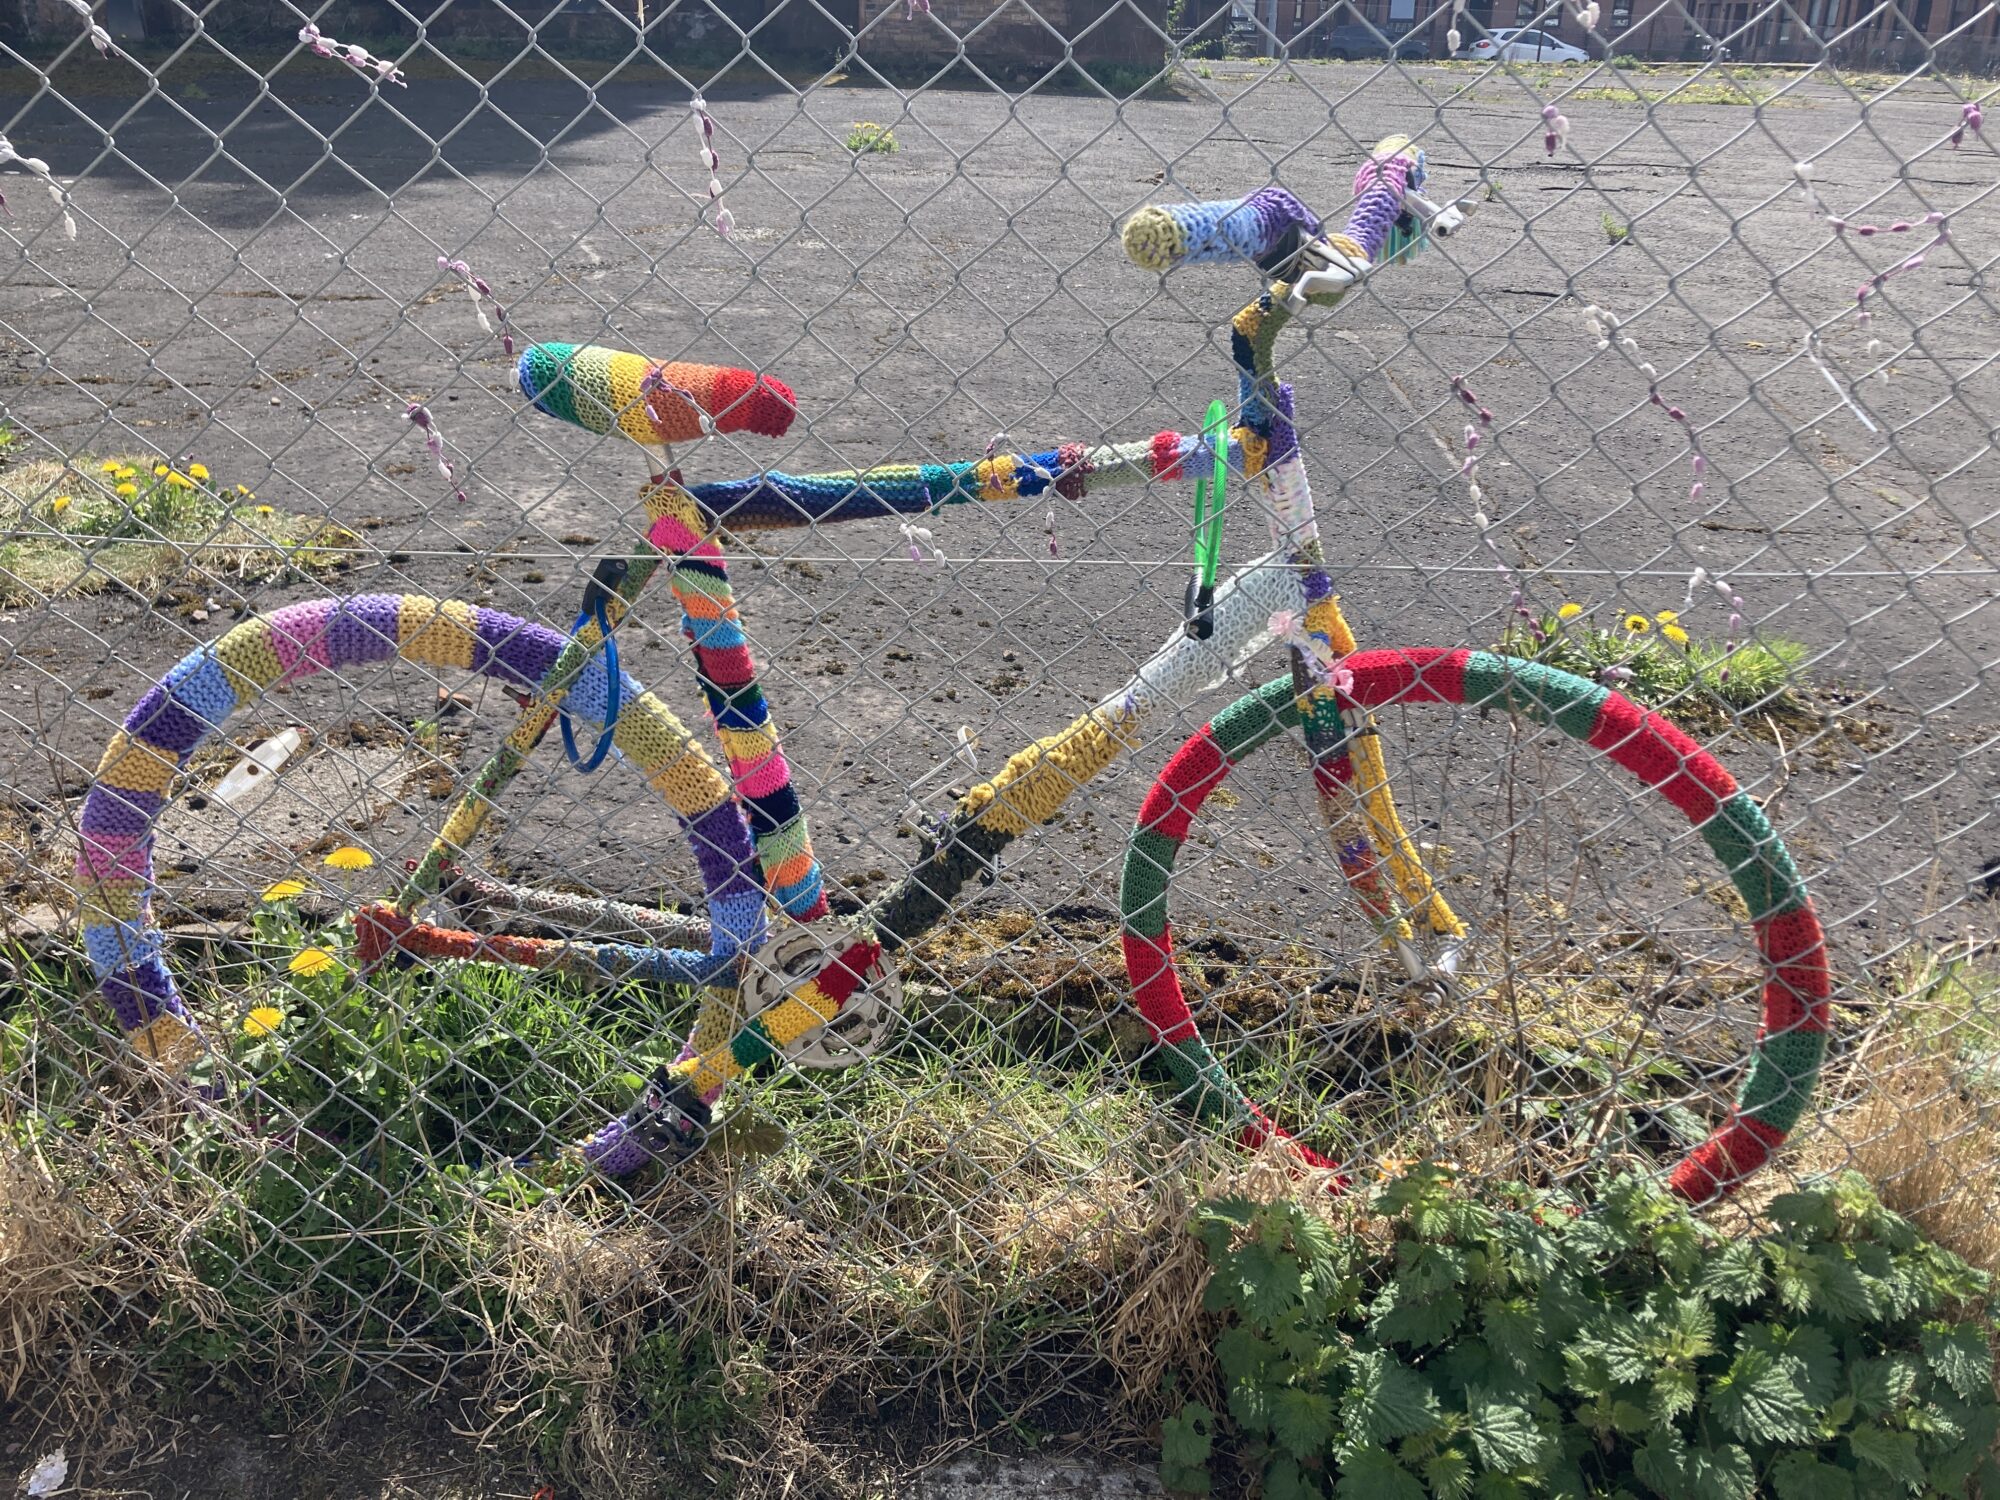 An abandoned bike that has been covered in colourful thread